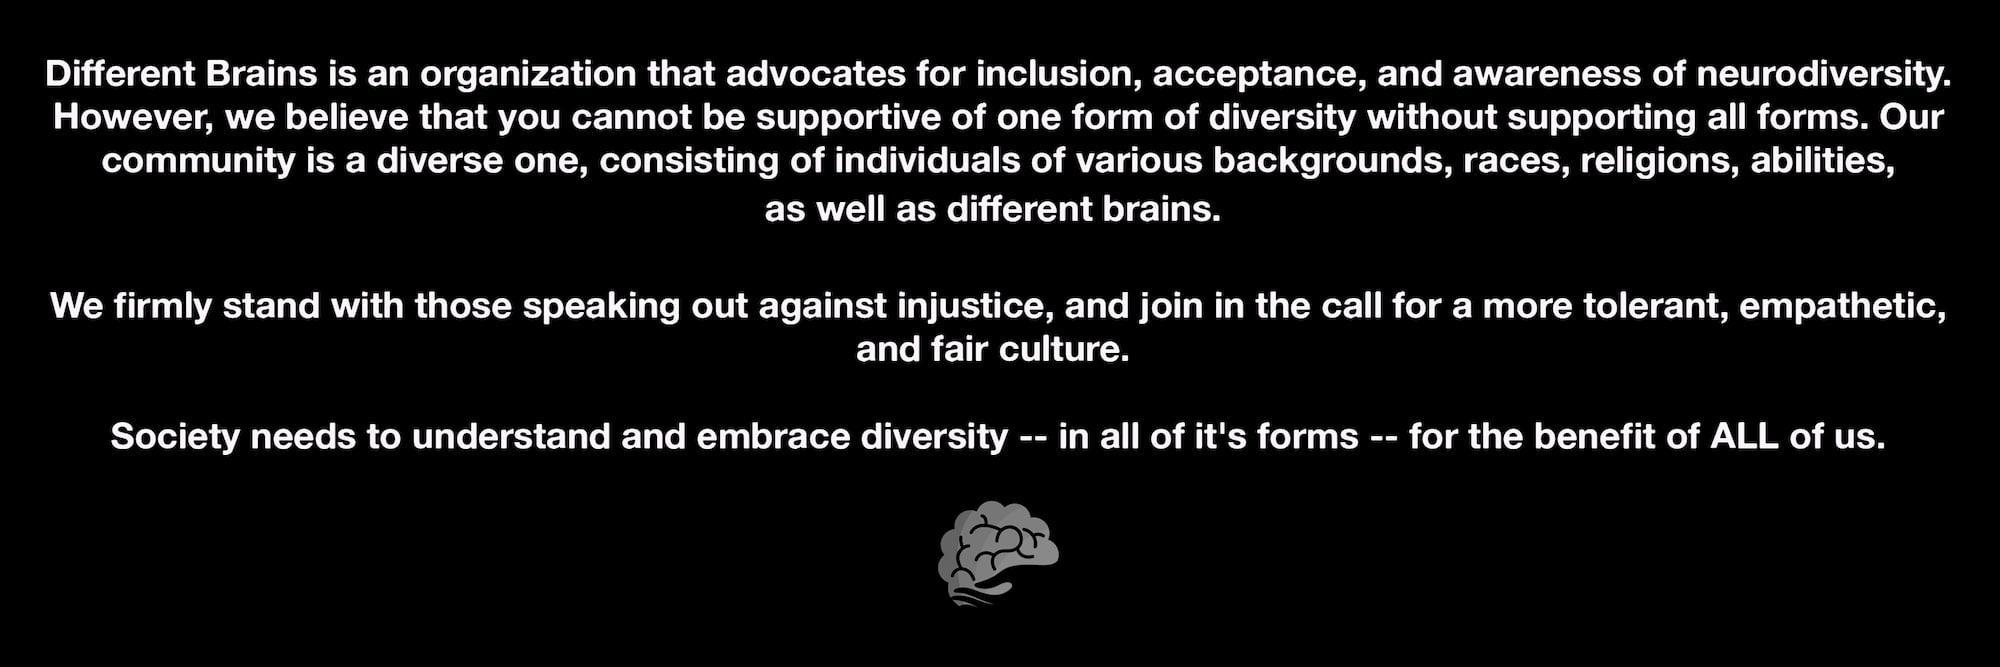 Different Brains firmlys stand with those speaking out against injustice, and join in the call for a more tolerant, empathetic, and fair culture.